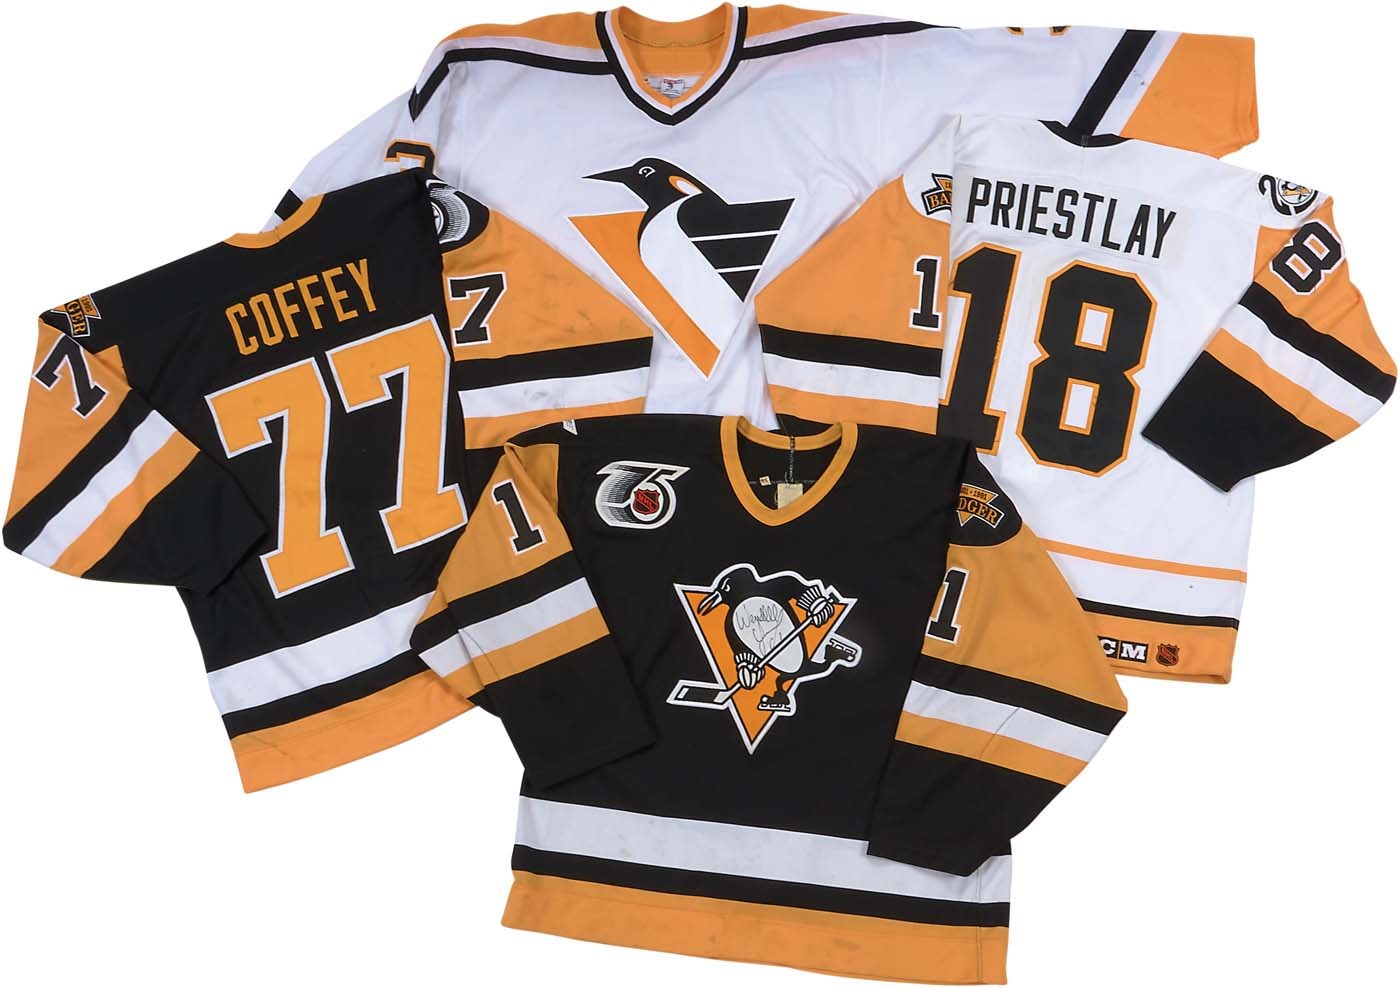 - 1990s-2000s Pittsburgh Penguins Game Worn Jerseys (4)